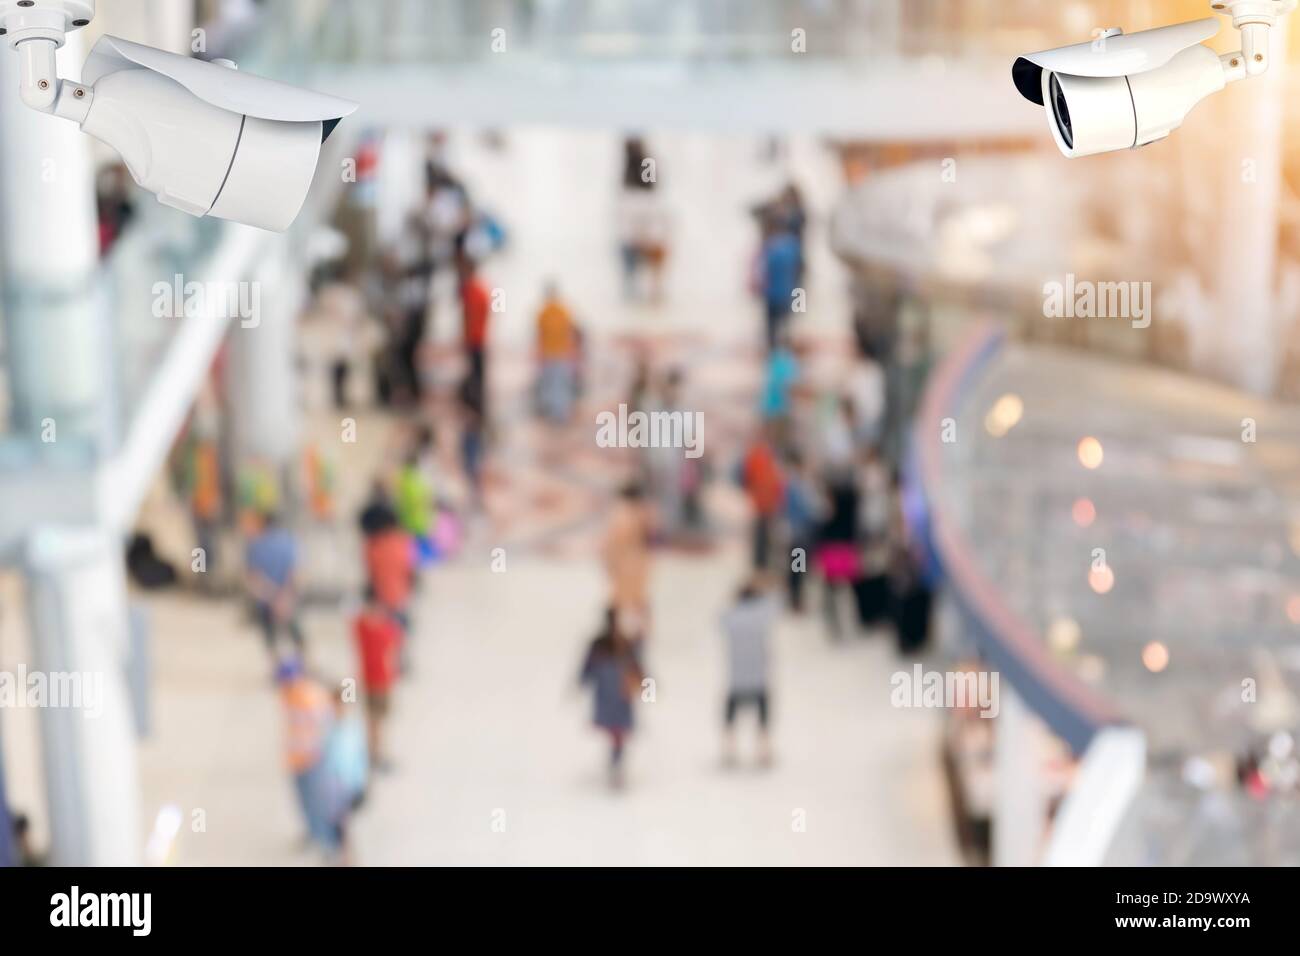 Security cameras (CCTV) or surveillance camera inside the airport terminal to the various internal security. Stock Photo